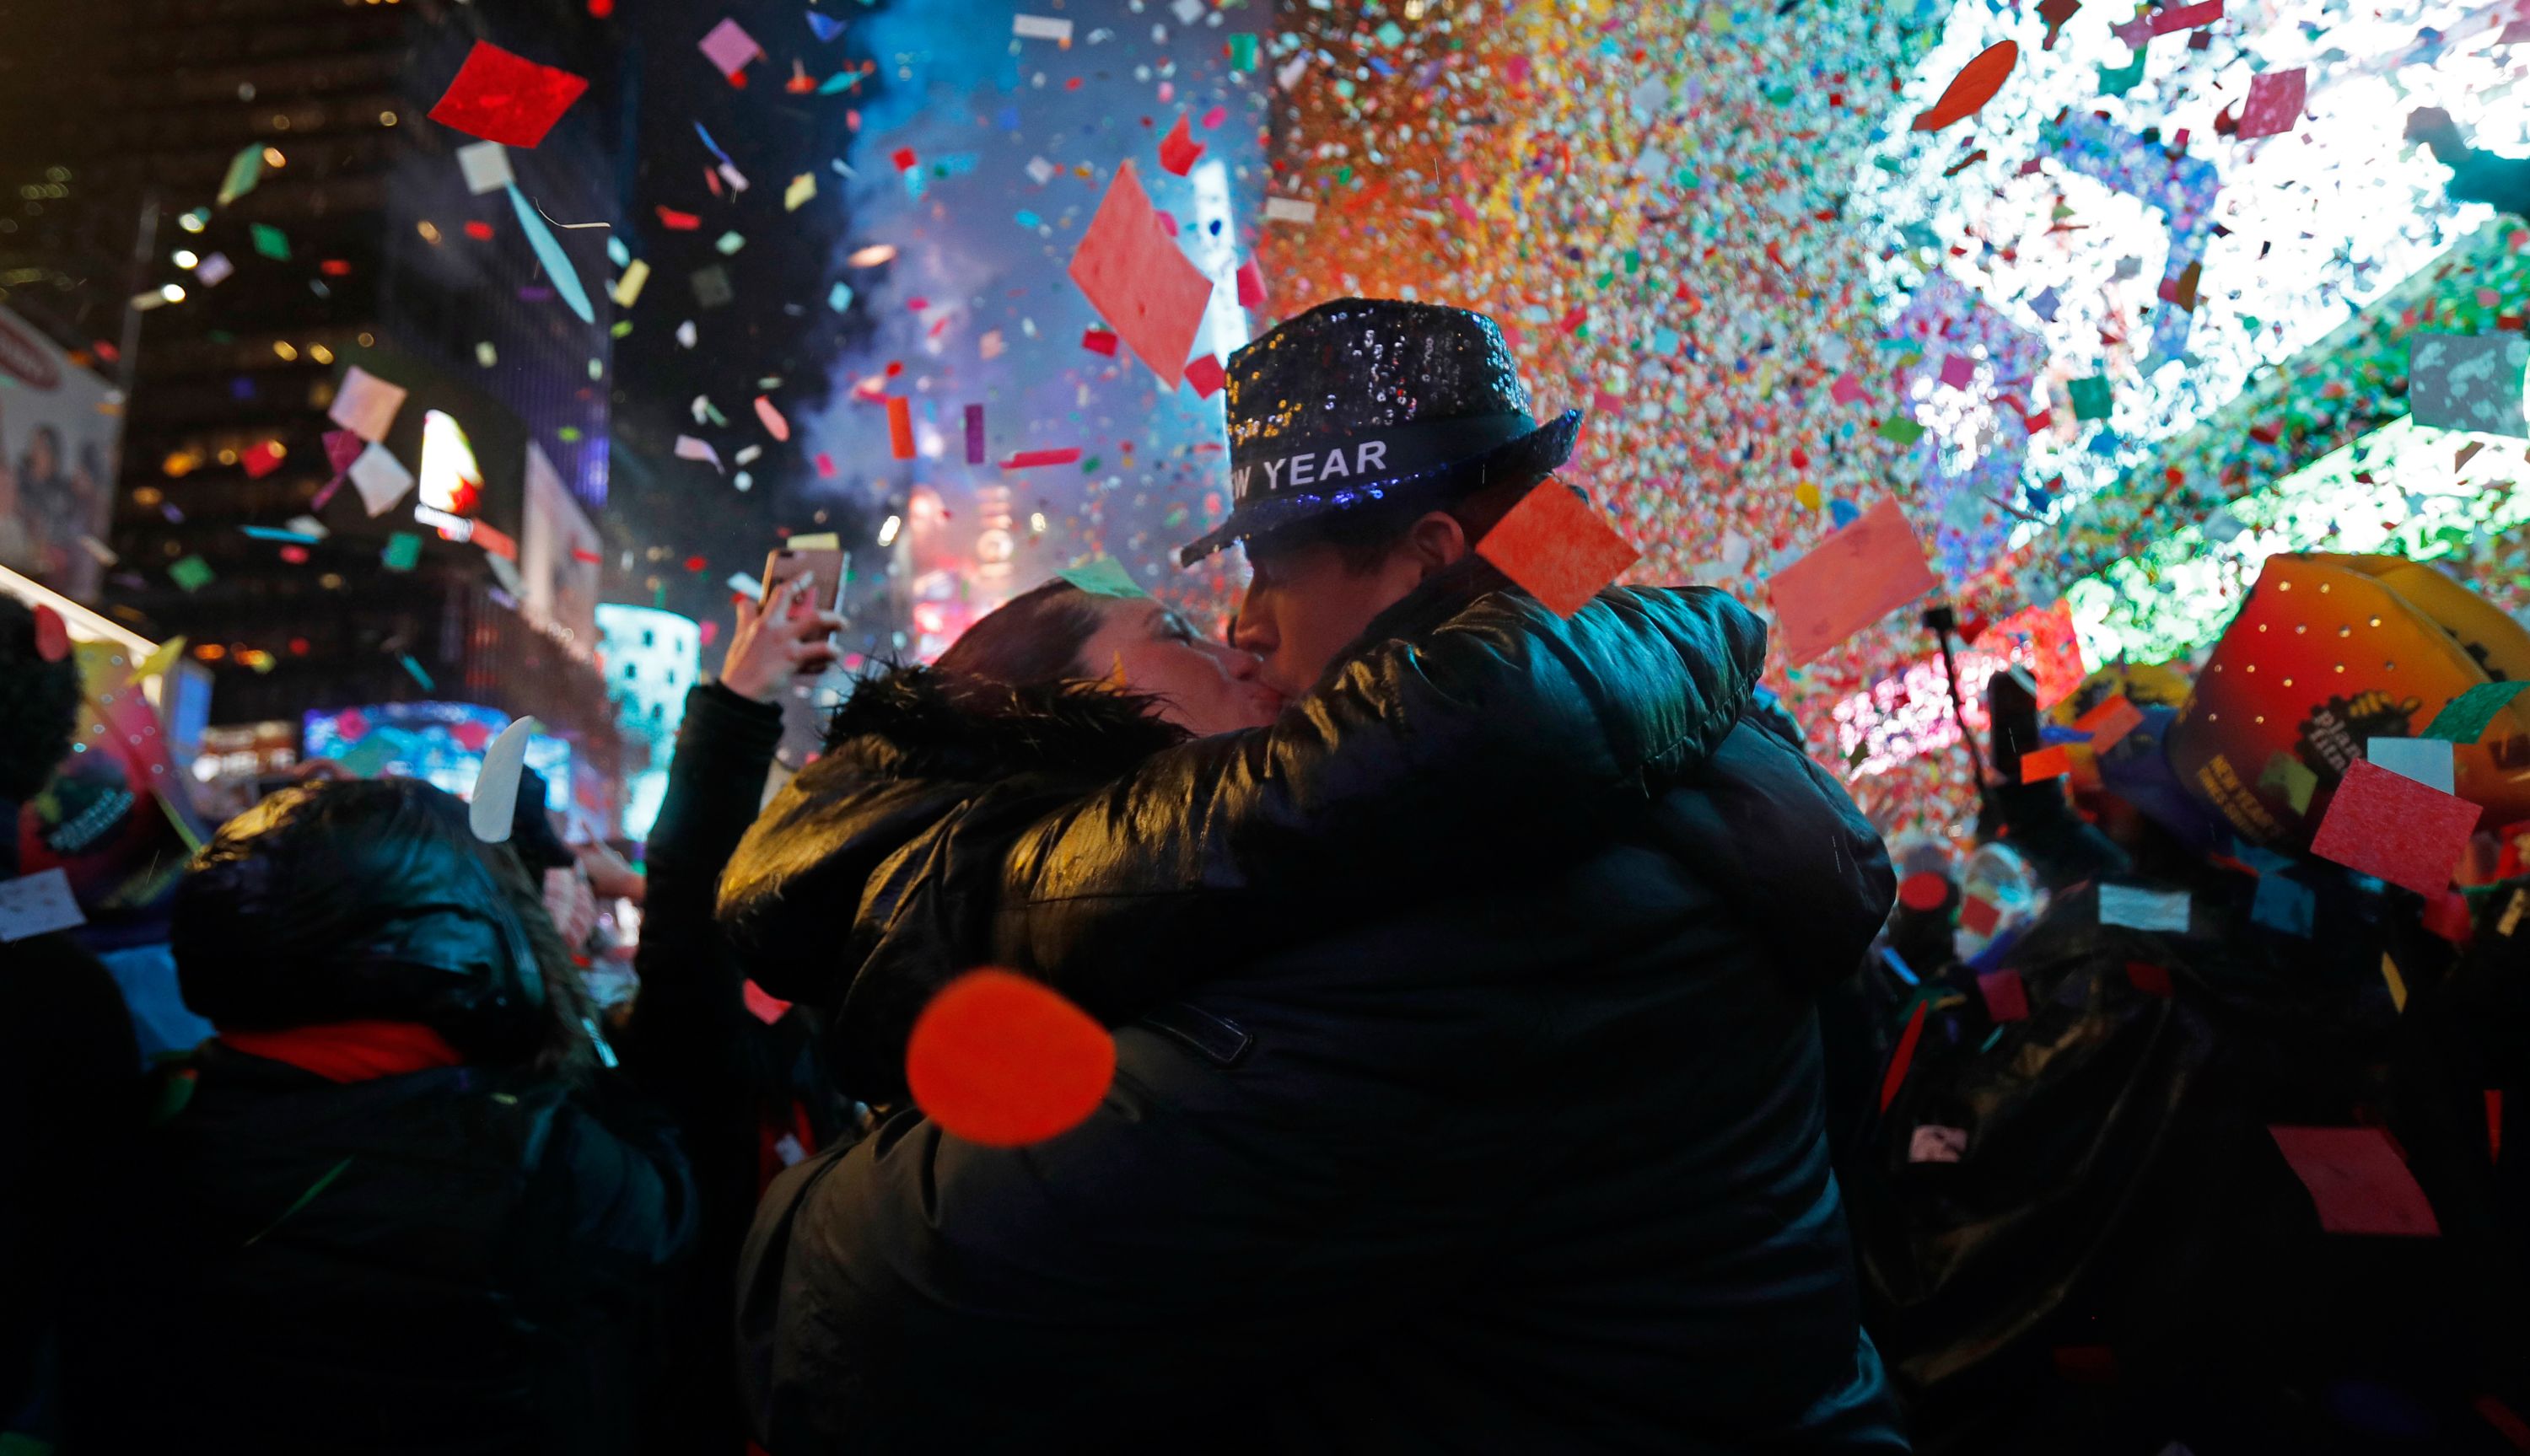 Joey and Claudia Flores of California kiss as confetti falls during New Year's celebrations in New York's Times Square.